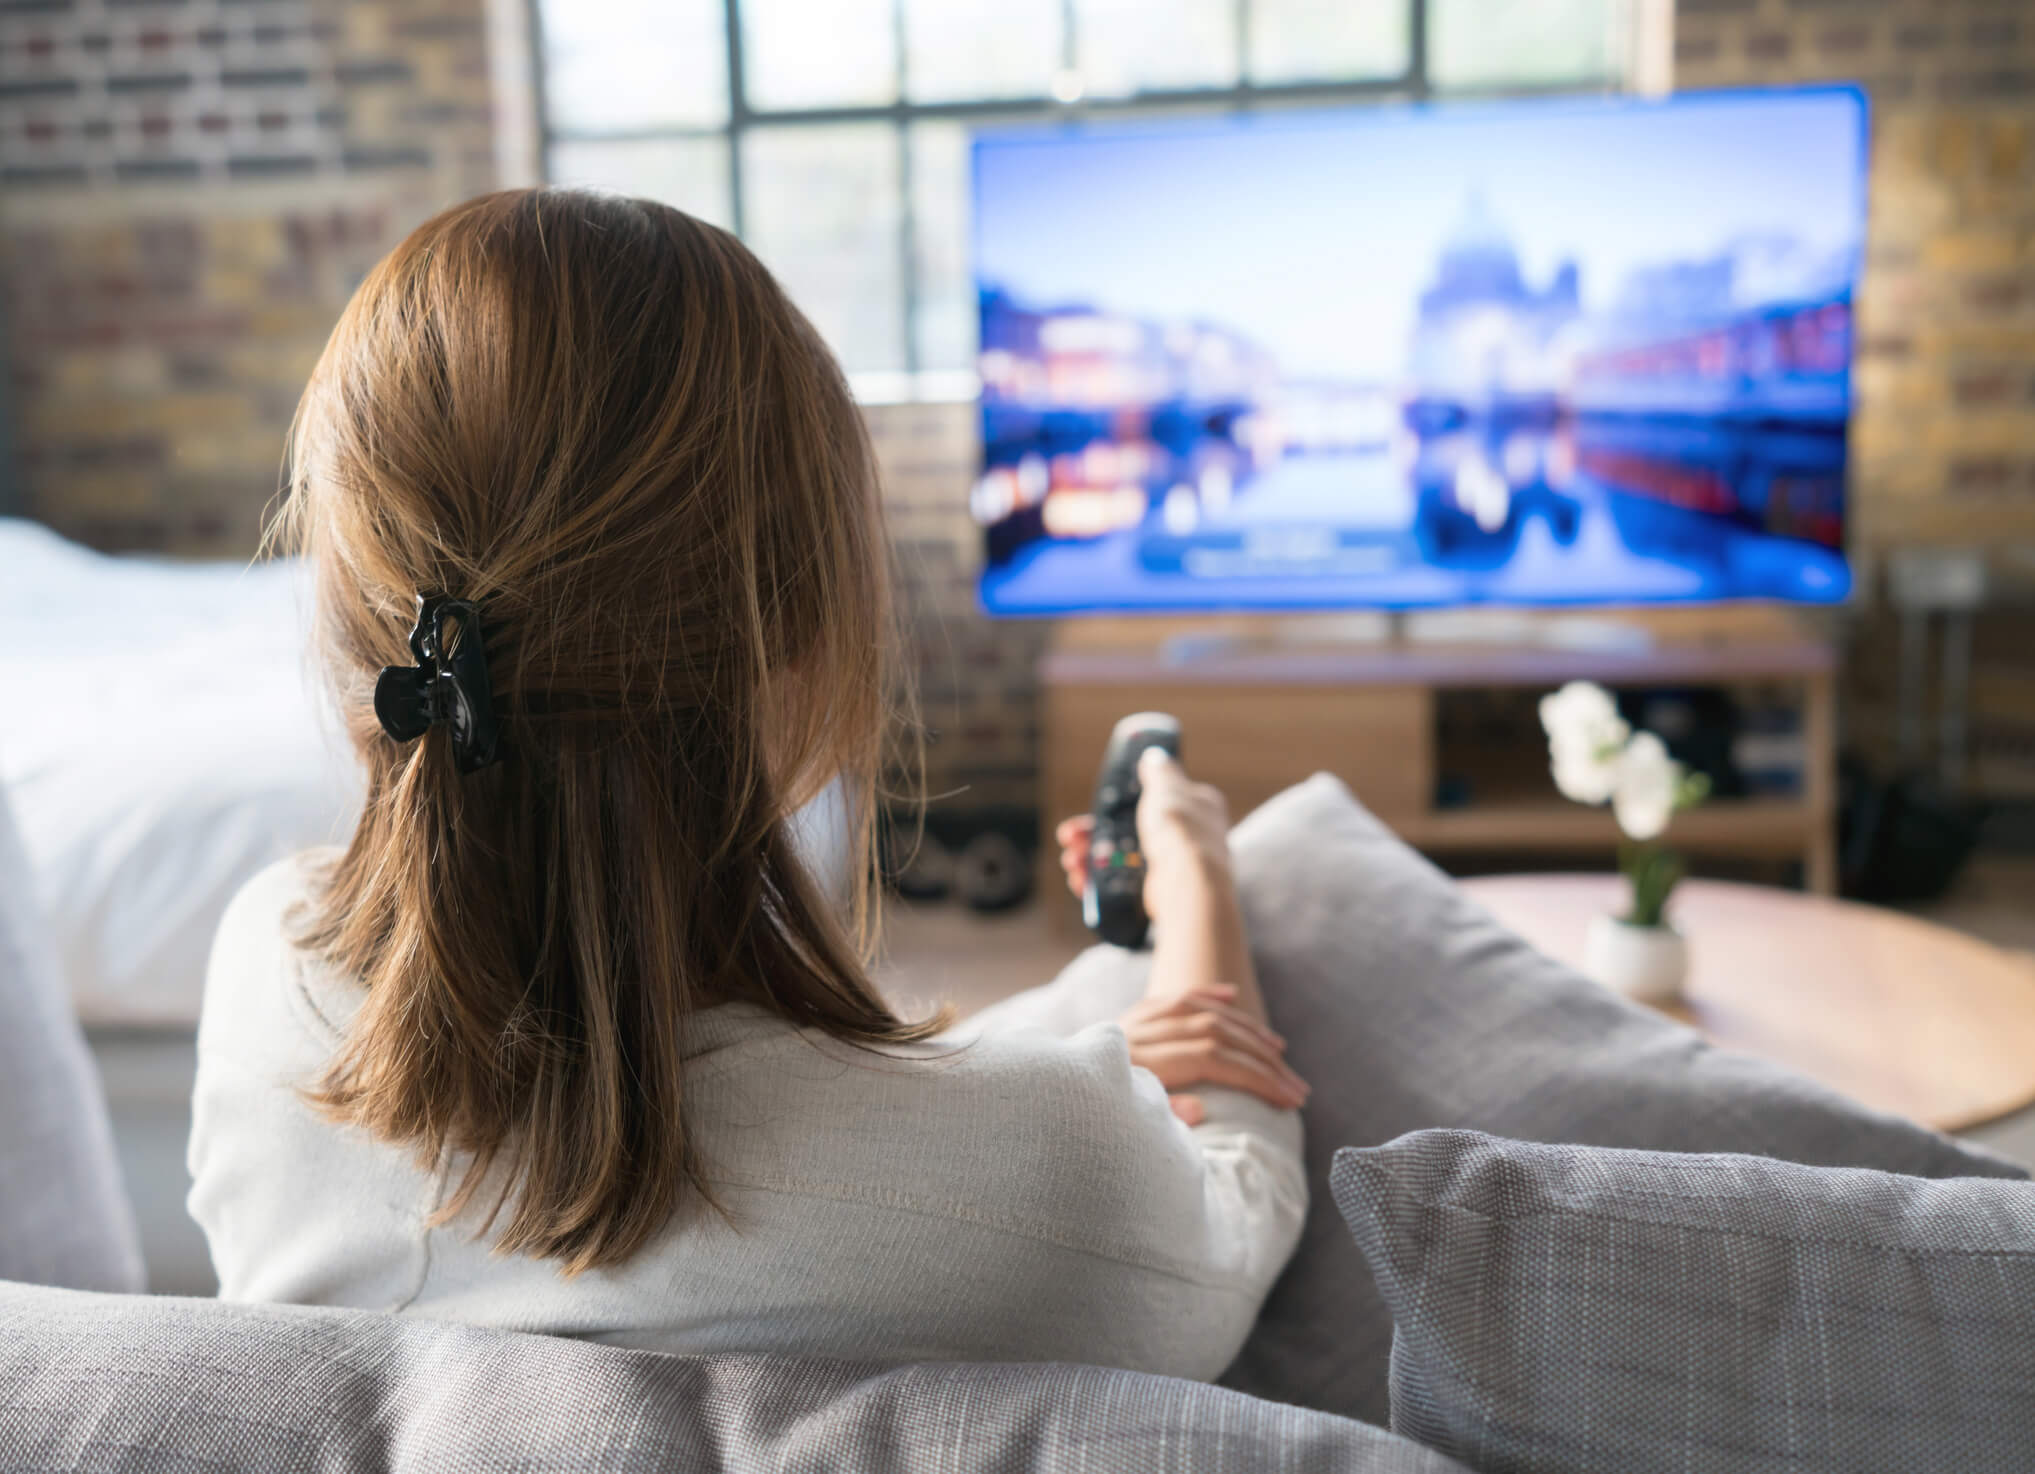 Top 6 TV Providers of 2020